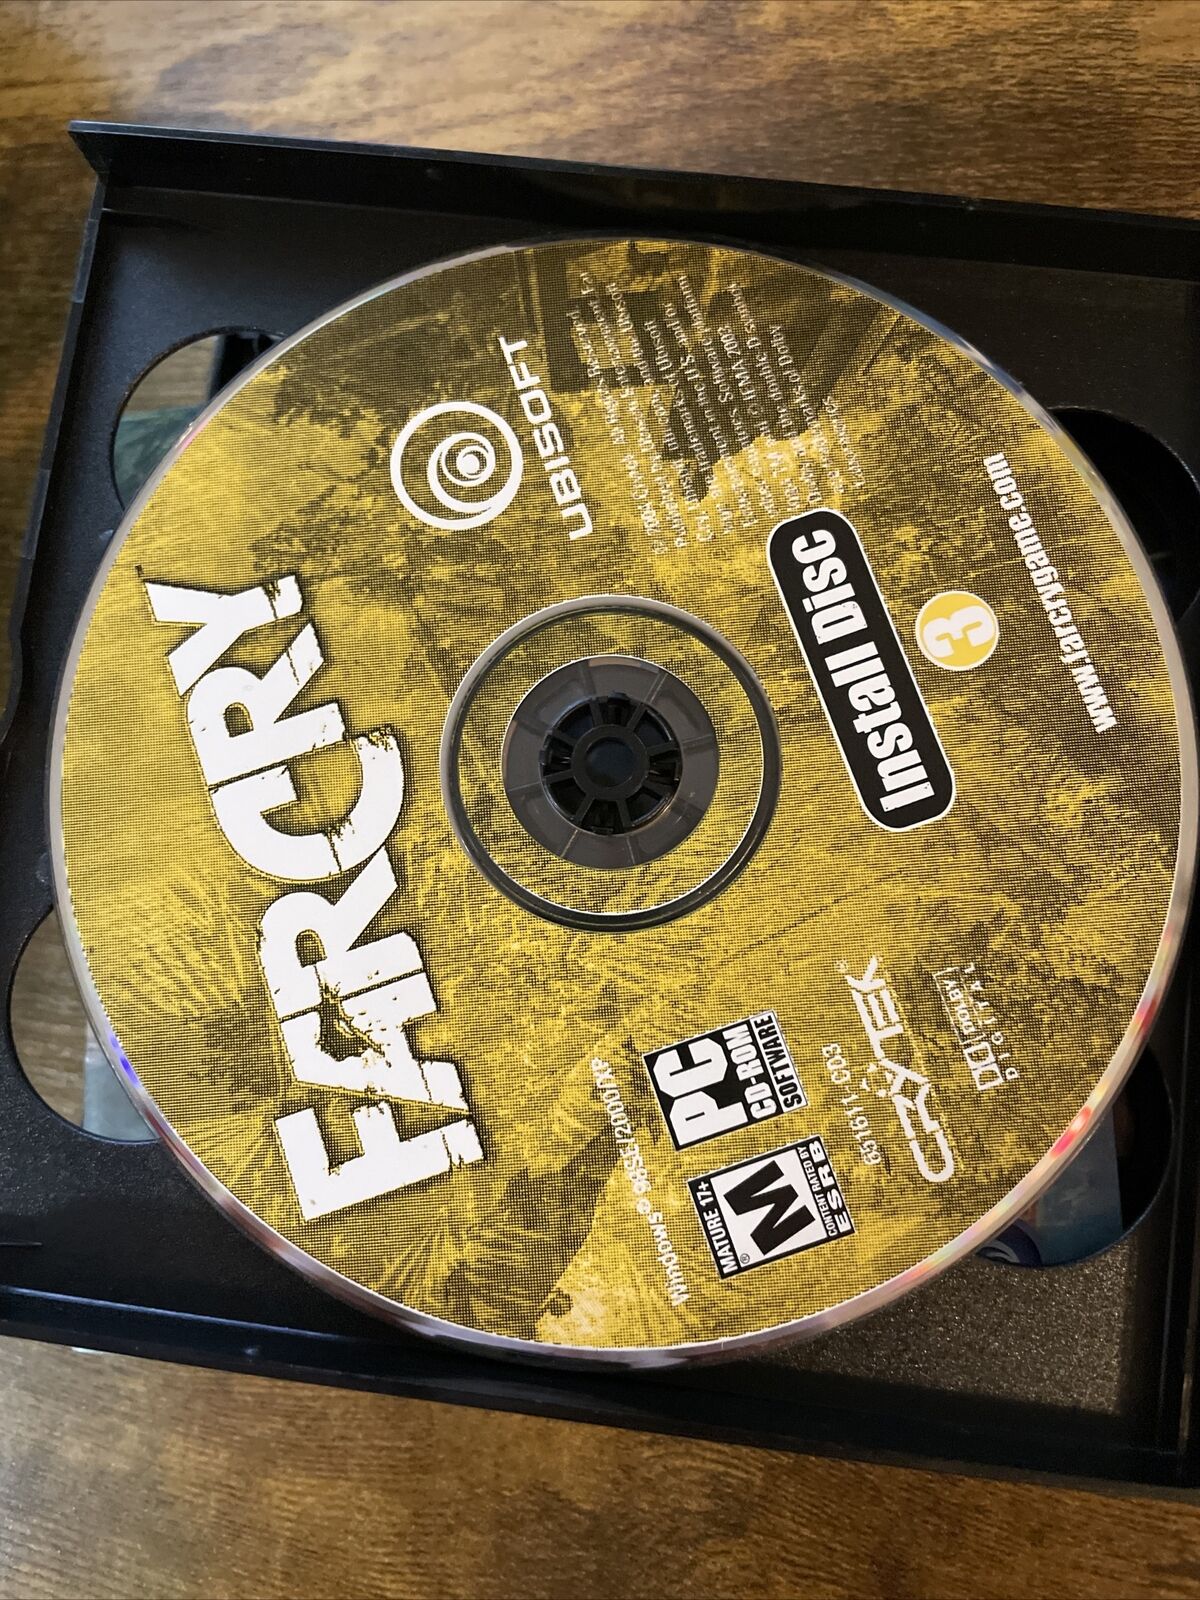 Far Cry 1 Ubisoft PC Game CD ROM Set (2004, Far Cry) All Discs / 5 Disc /  Extra.